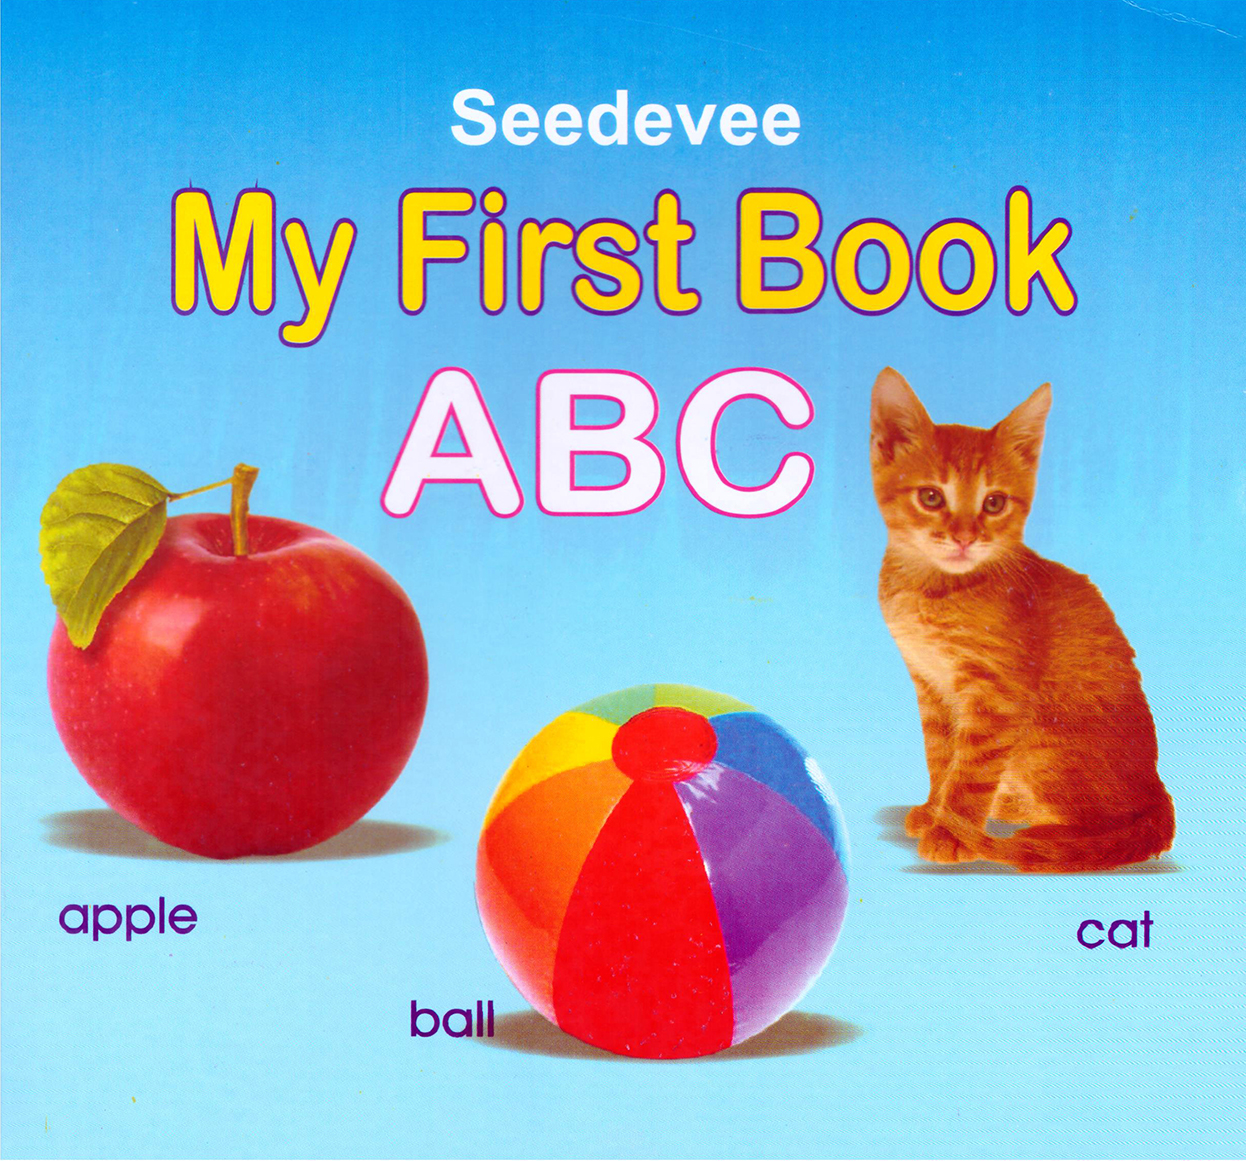 Seedevee My First Book ABC